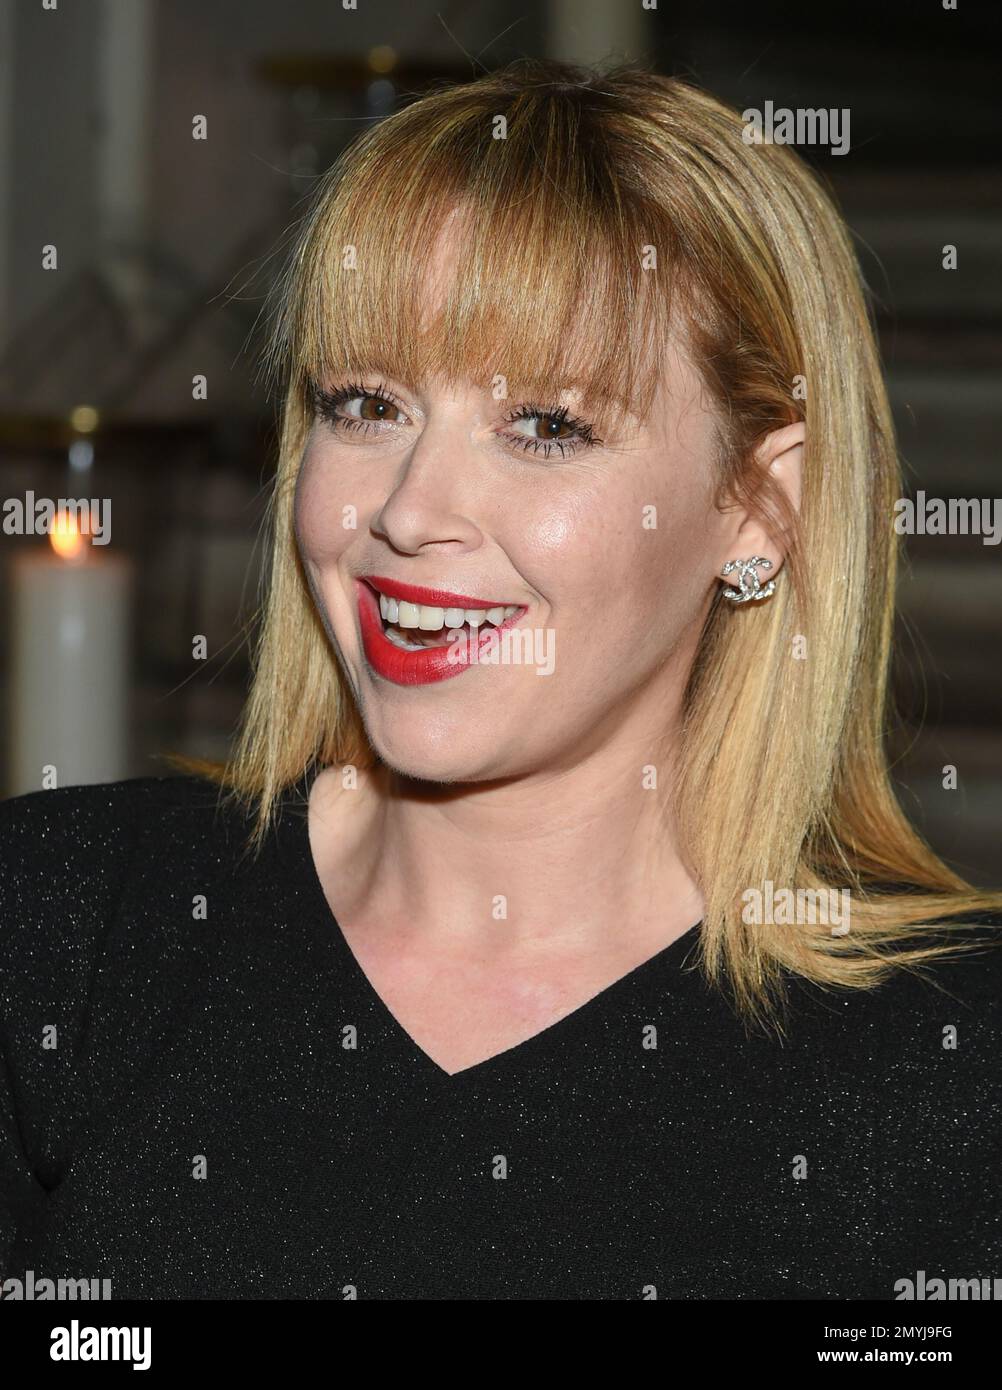 Actress Natasha Lyonne attends the Chanel Fine Jewelry event to ...